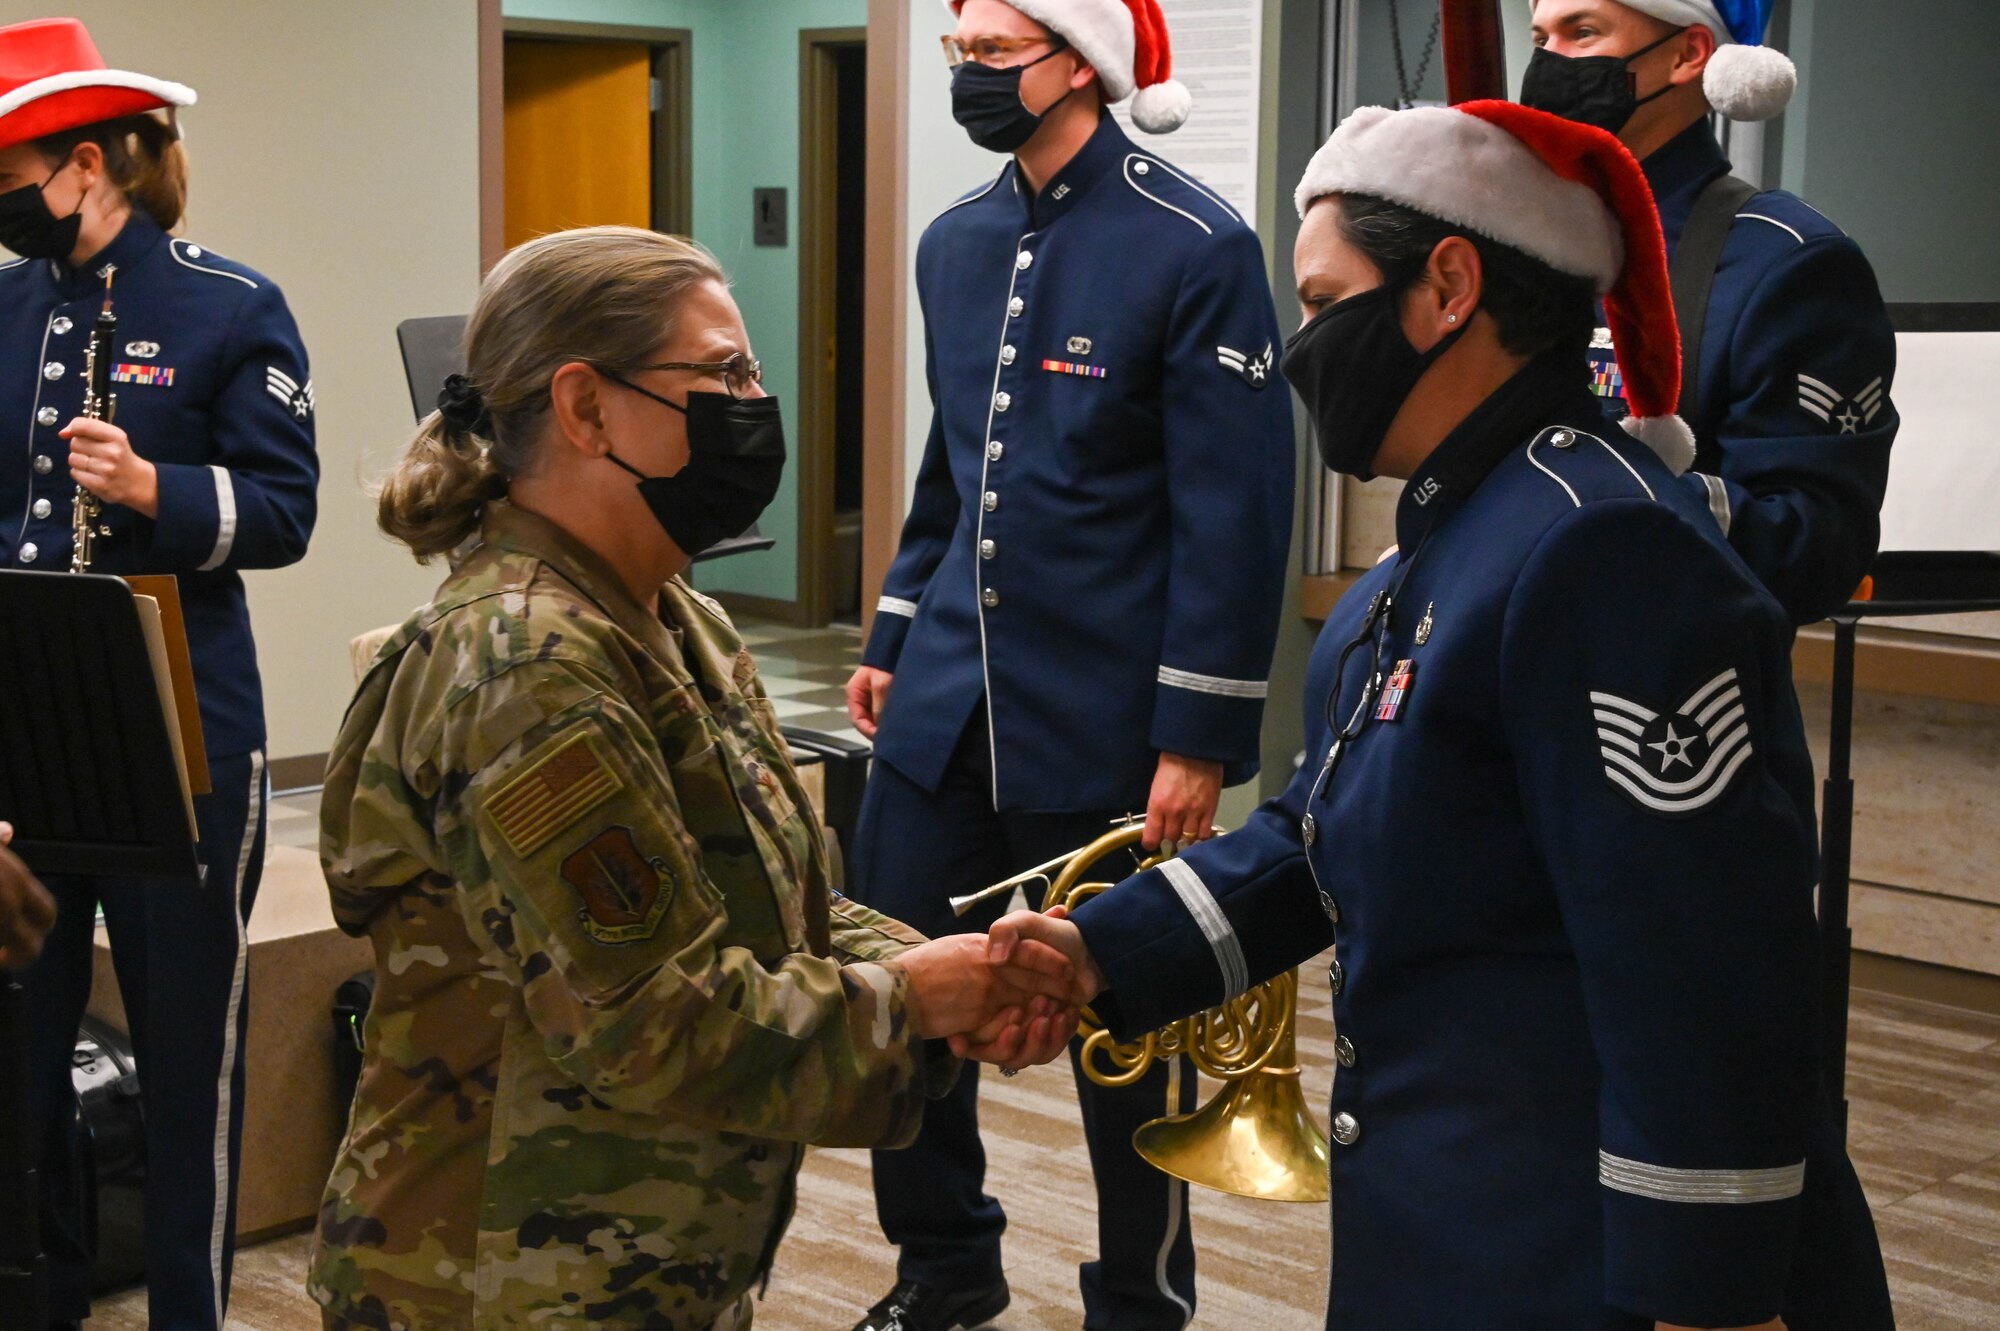 U.S. Air Force Tech. Sgt. Denise Cardona Santos, U.S. Air Force Band of the West clarinetist, is coined by Col. Judy Rattan, 97th Medical Group commander, at Altus Air Force Base, Oklahoma, Dec. 14, 2021. The USAF Band of the West performed at numerous locations on base, including the Base Exchange, Child Development Center, Club Altus, the 97th Mission Support Group. (U.S. Air Force photo by Airman 1st Class Kayla Christenson)